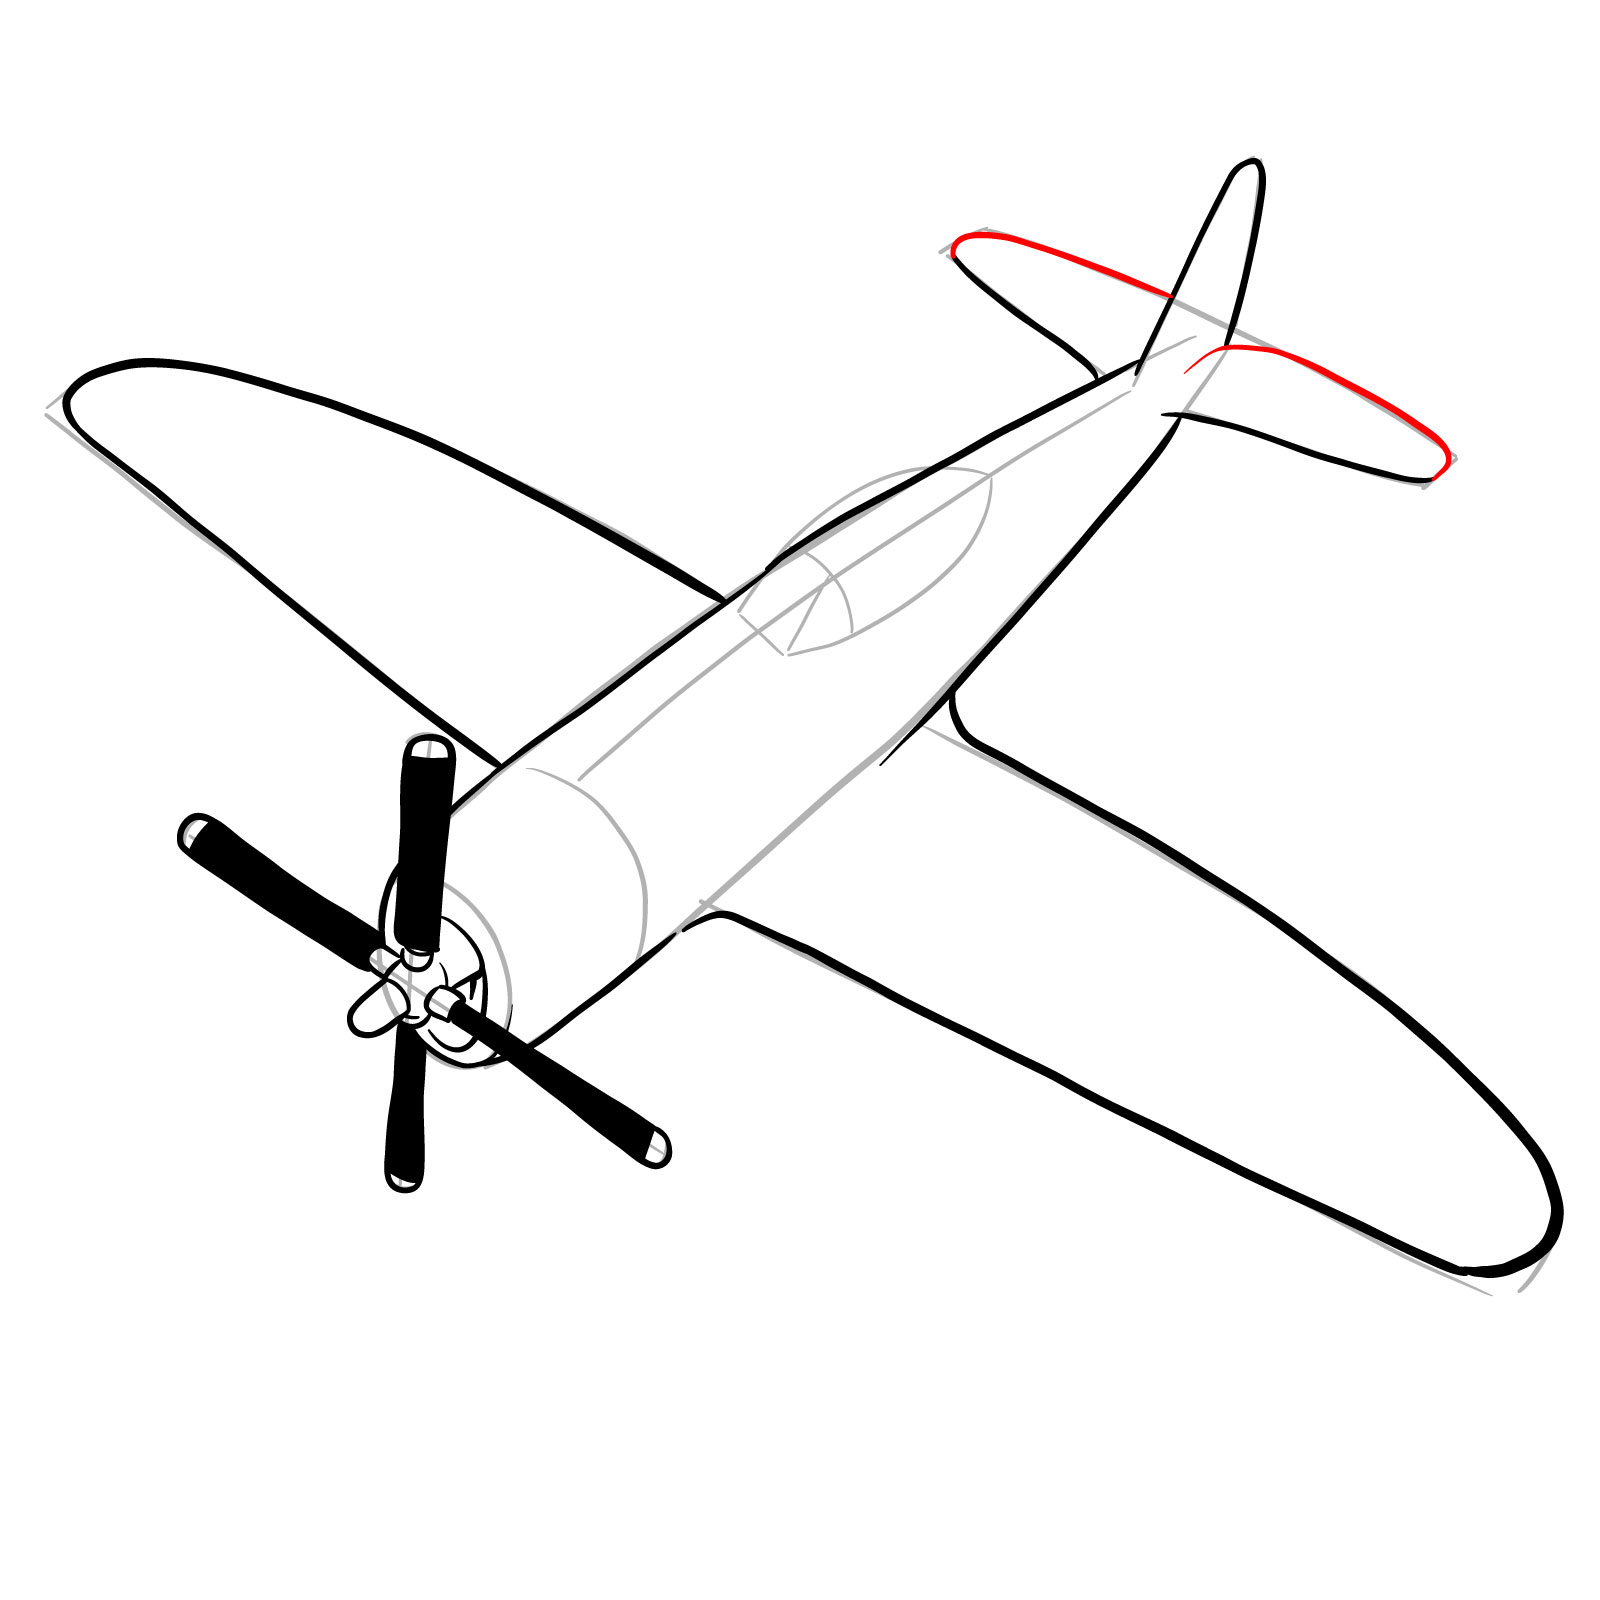 How to draw the Republic P-47 Thunderbolt - step 17